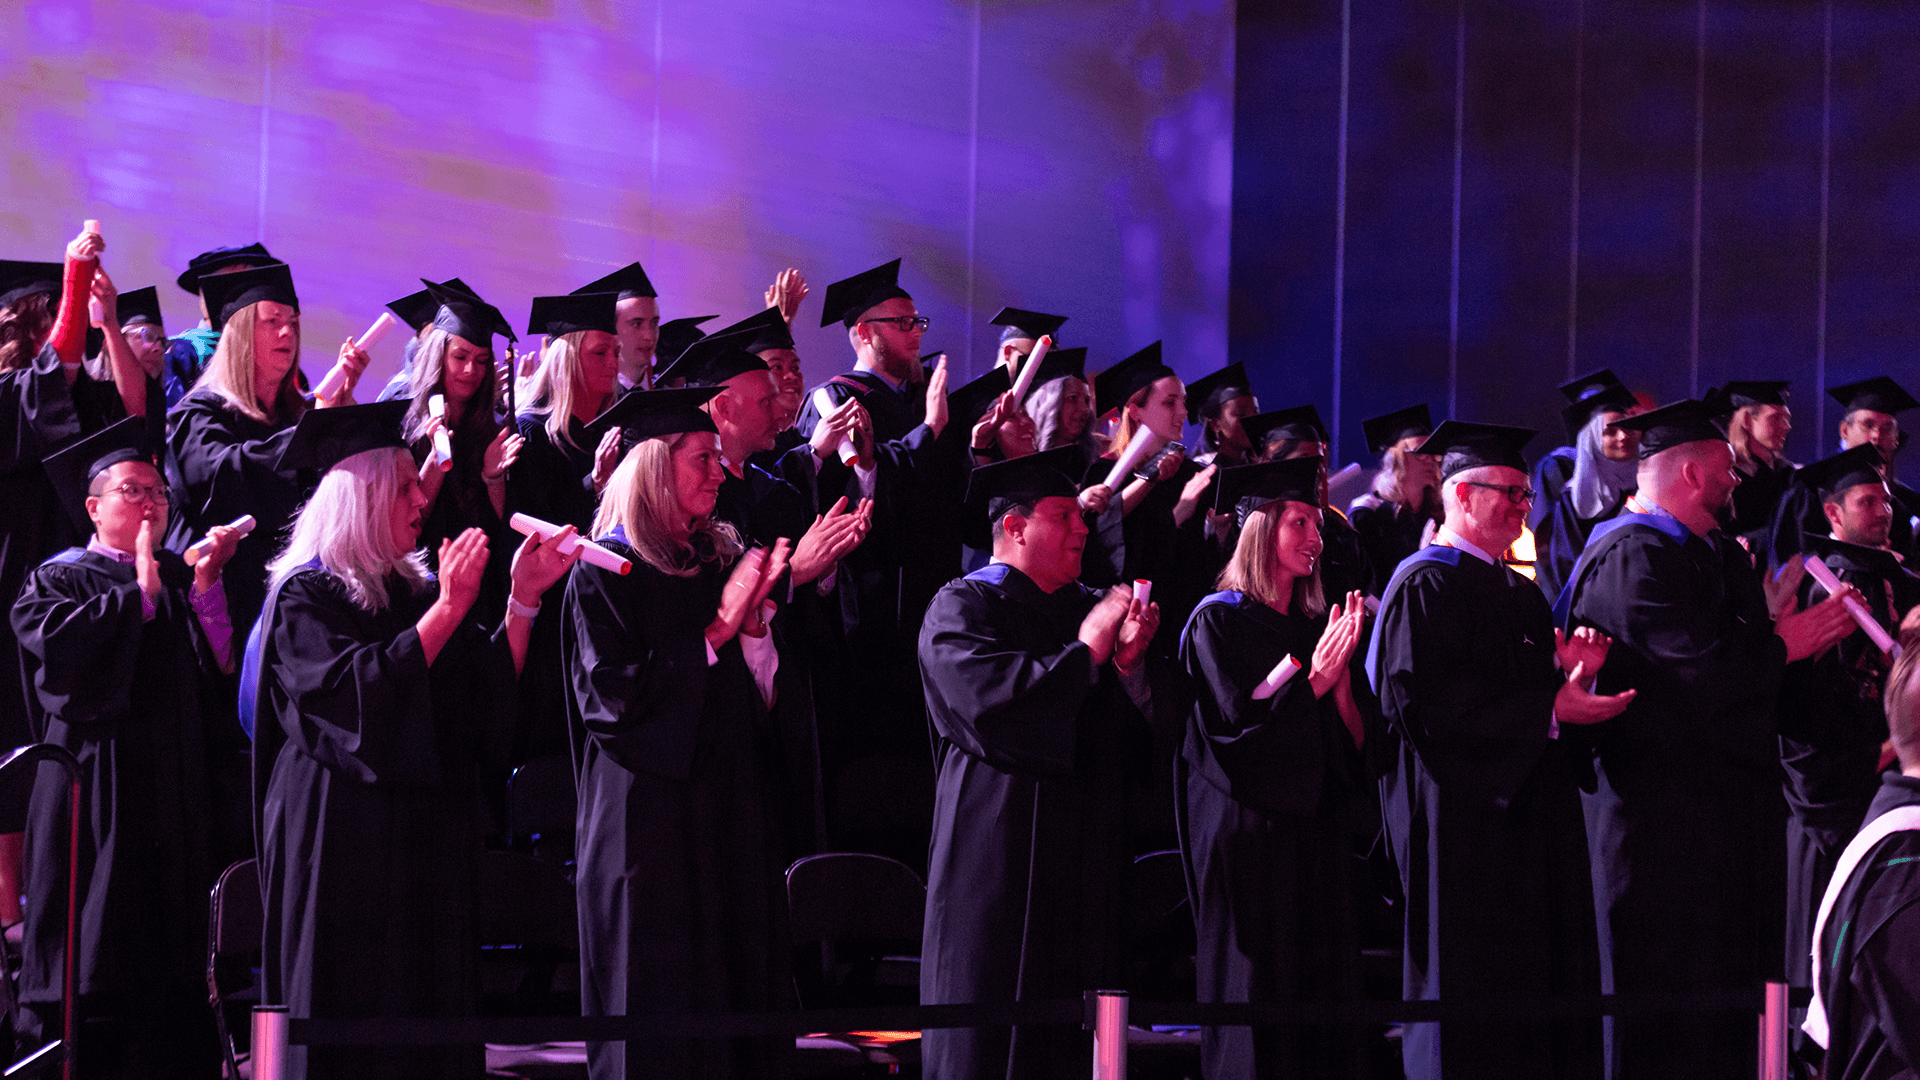 group shot of graduates standing and clapping